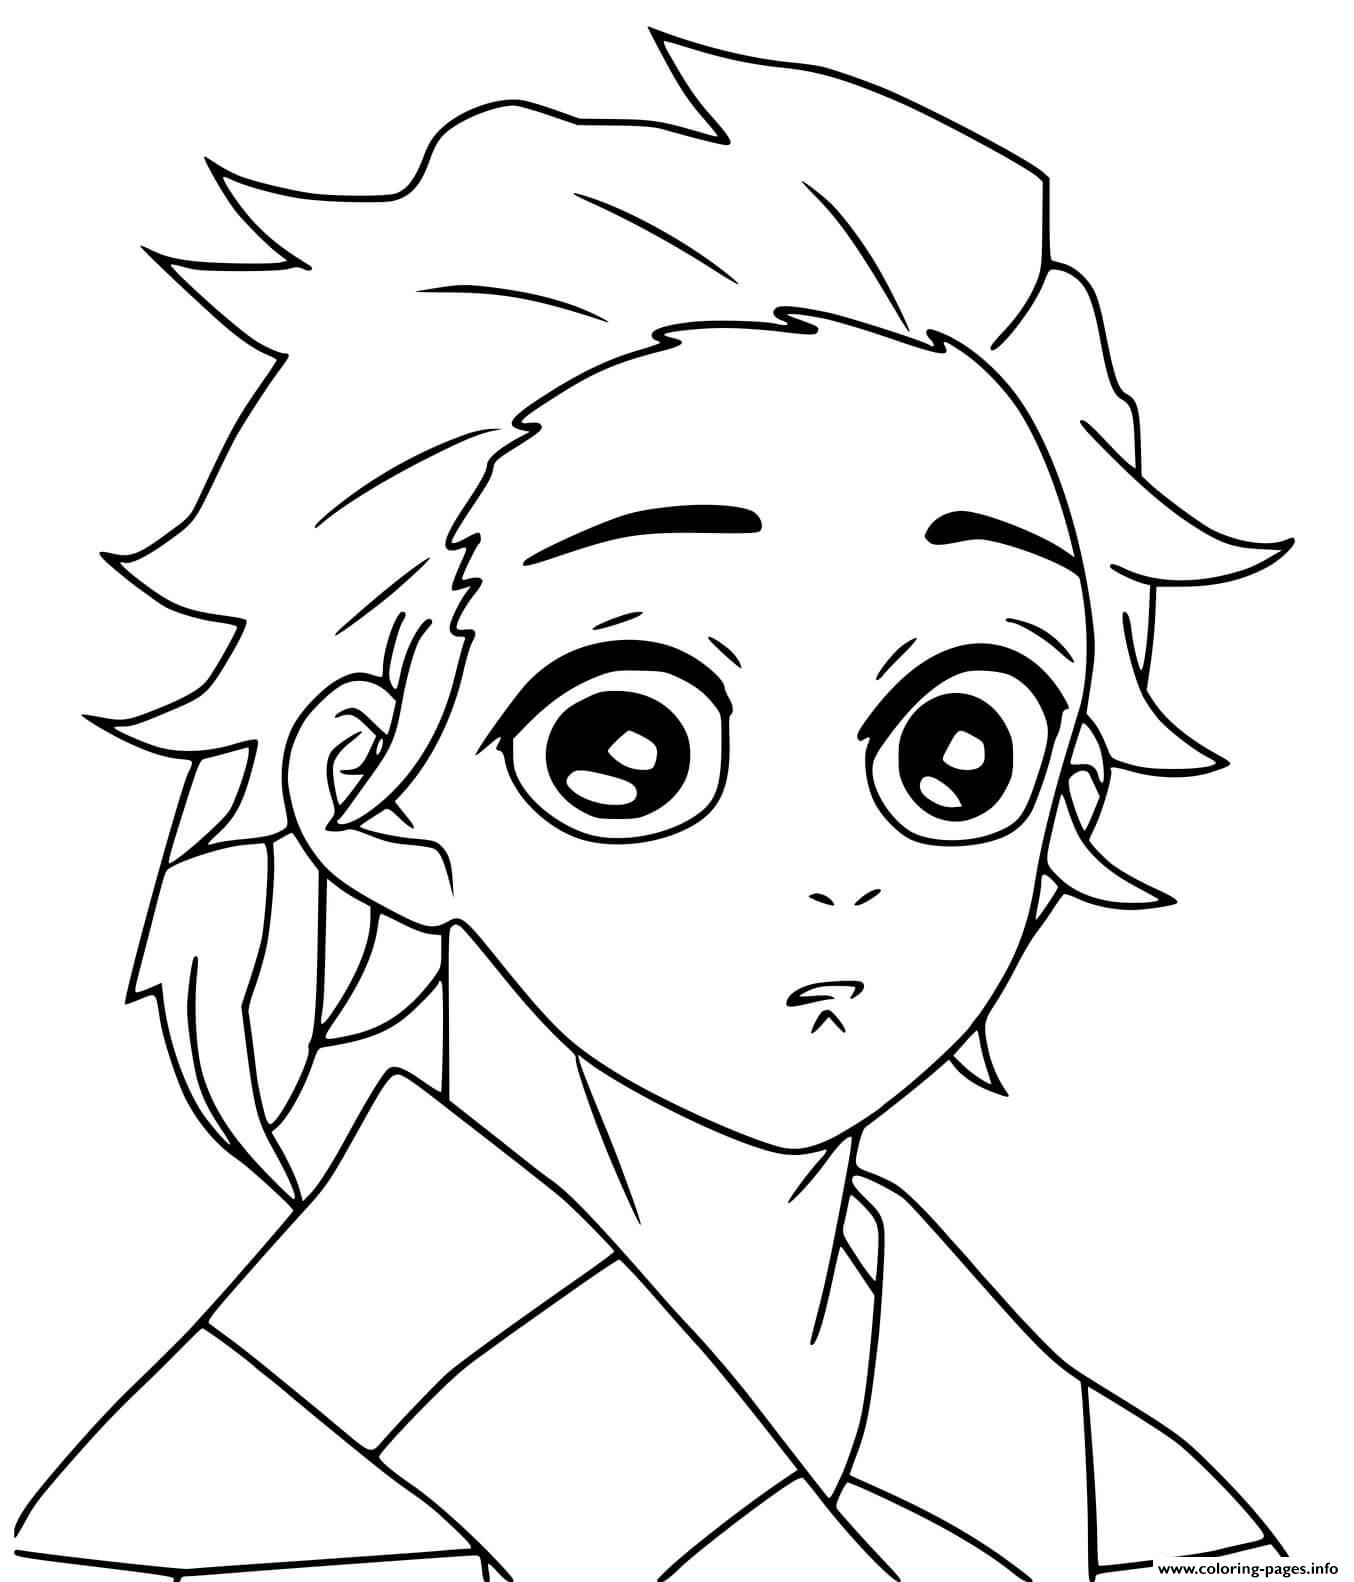 Tanjiro Kamado Demon Slayer Coloring Page Free Printable Coloring Images And Photos Finder